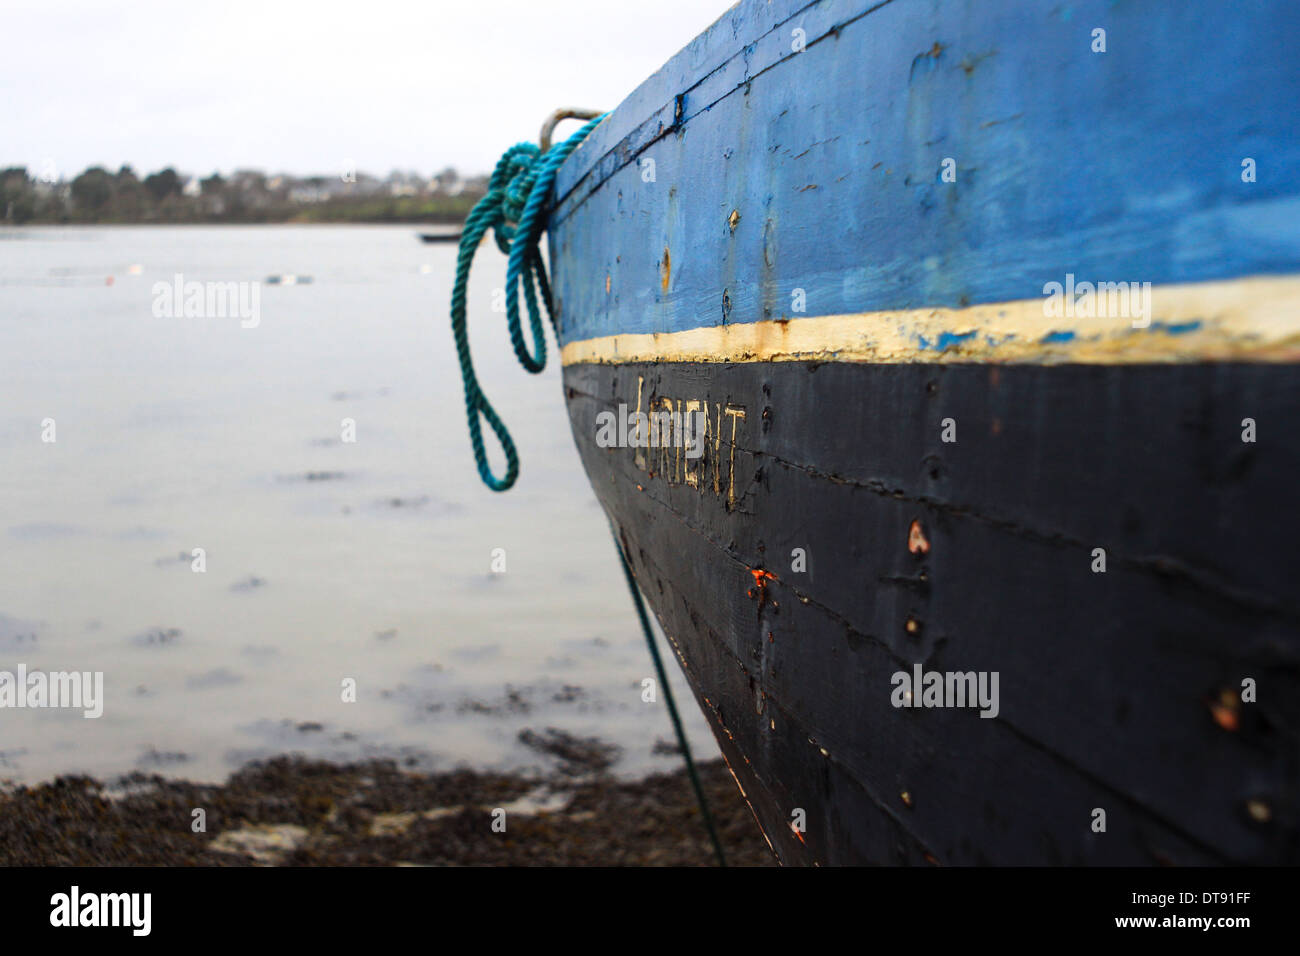 Wooden boat on the rocky beach Stock Photo